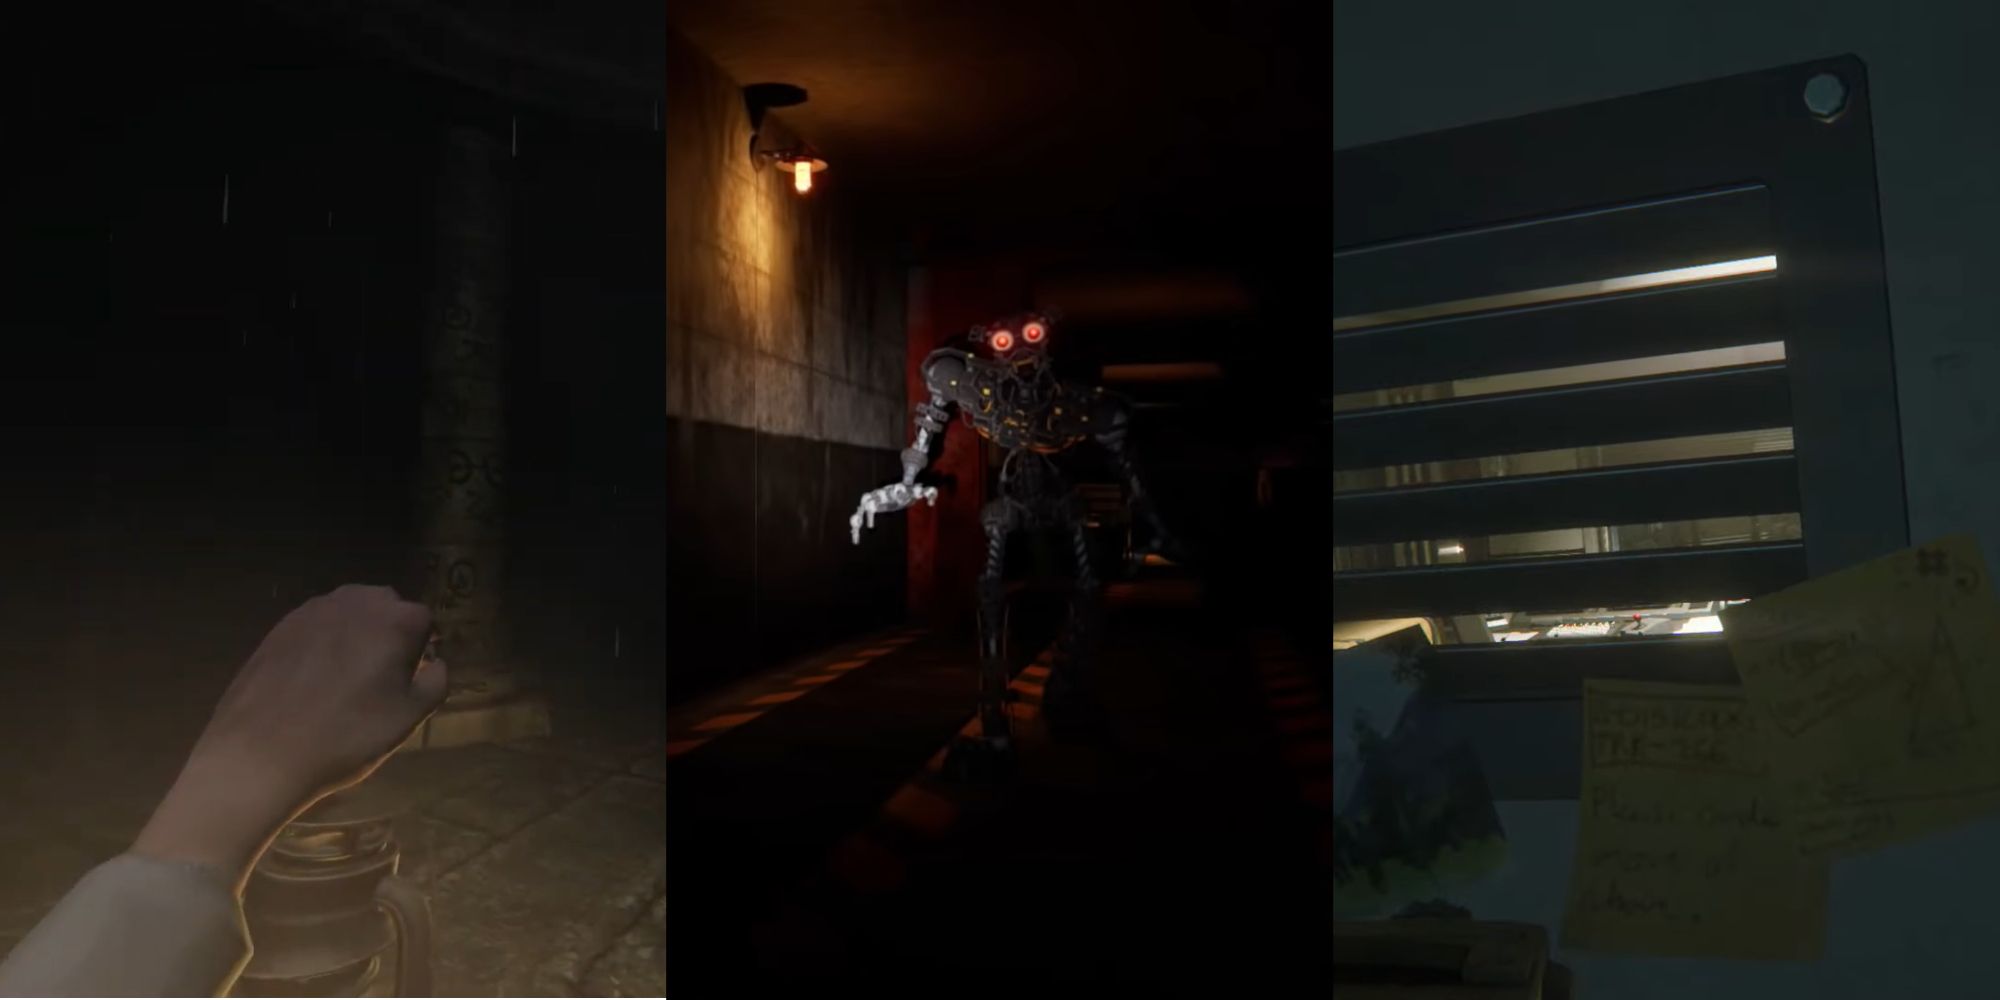 Three images, from left to right - Lantern in Amnesia, Endoskeleton from Security Breach, hiding in a locker from Alien Isolation